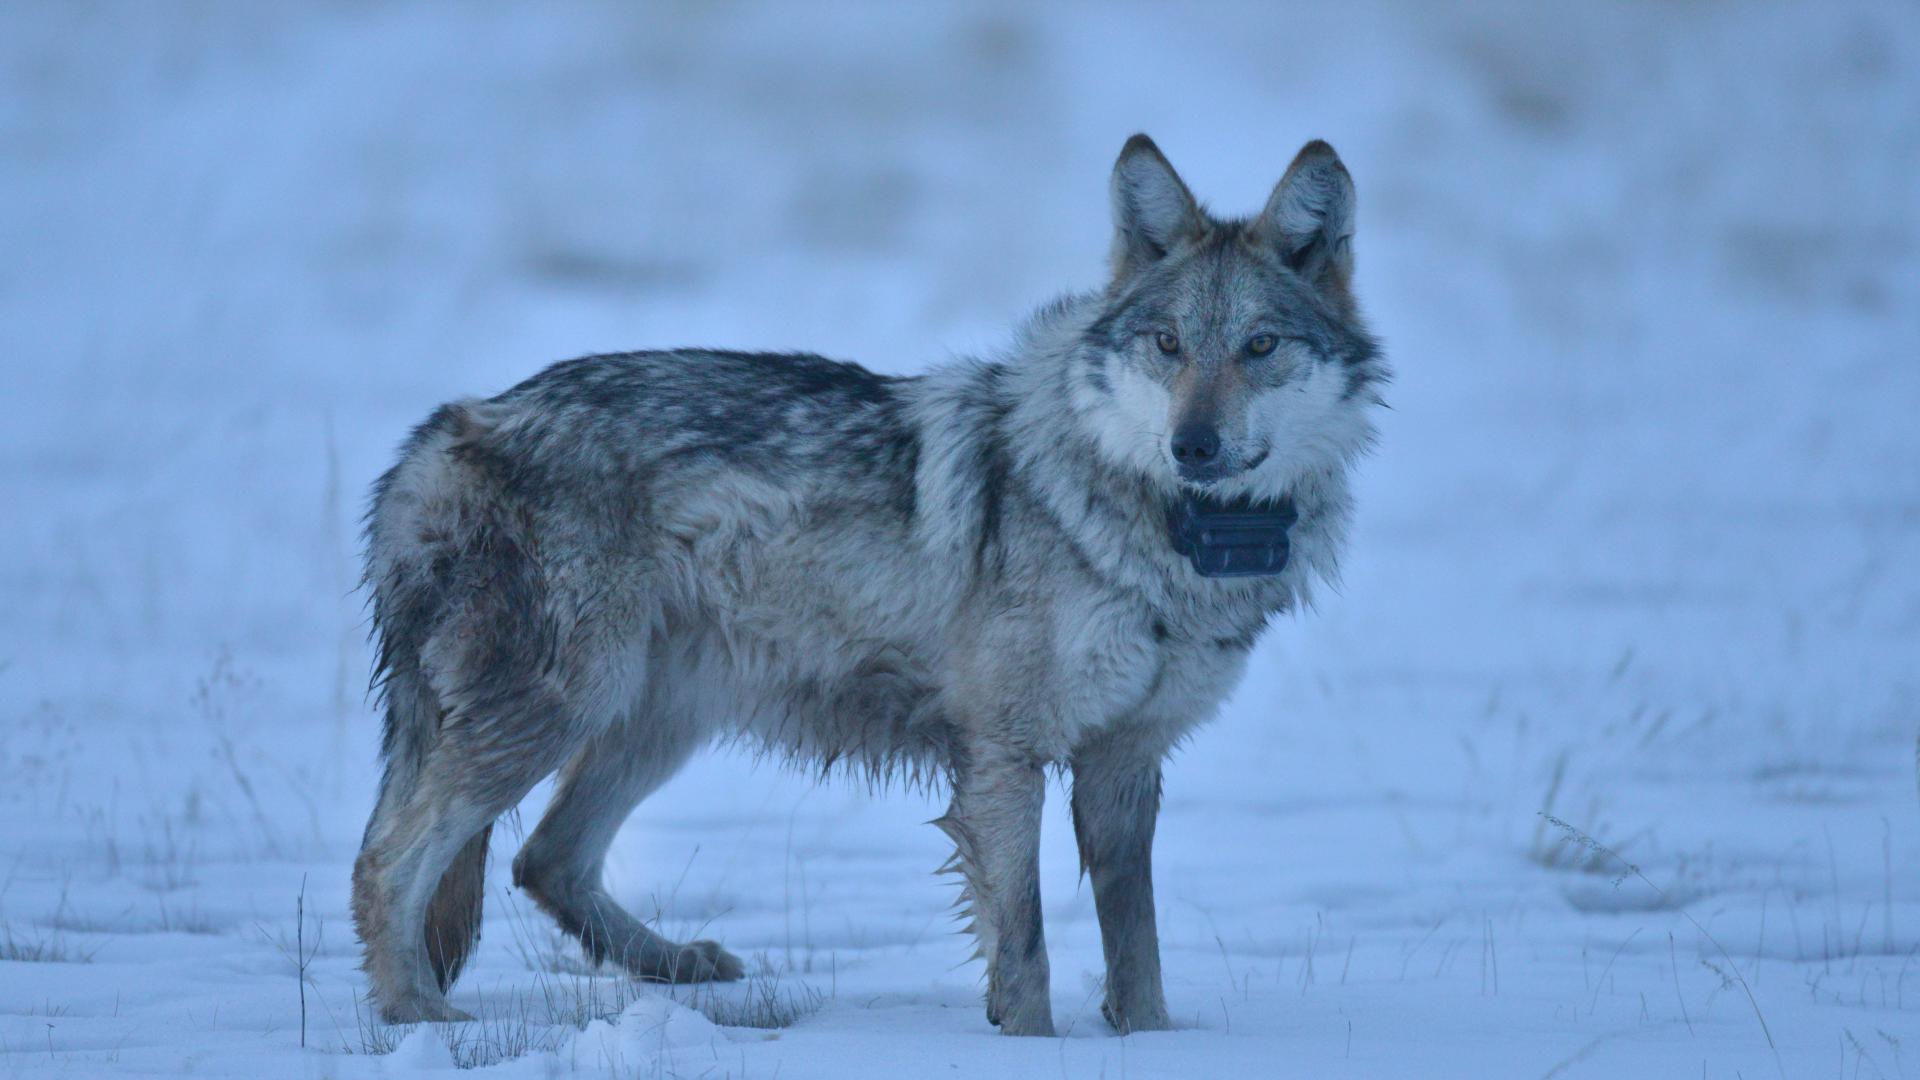 Mexican Gray wolf in snow